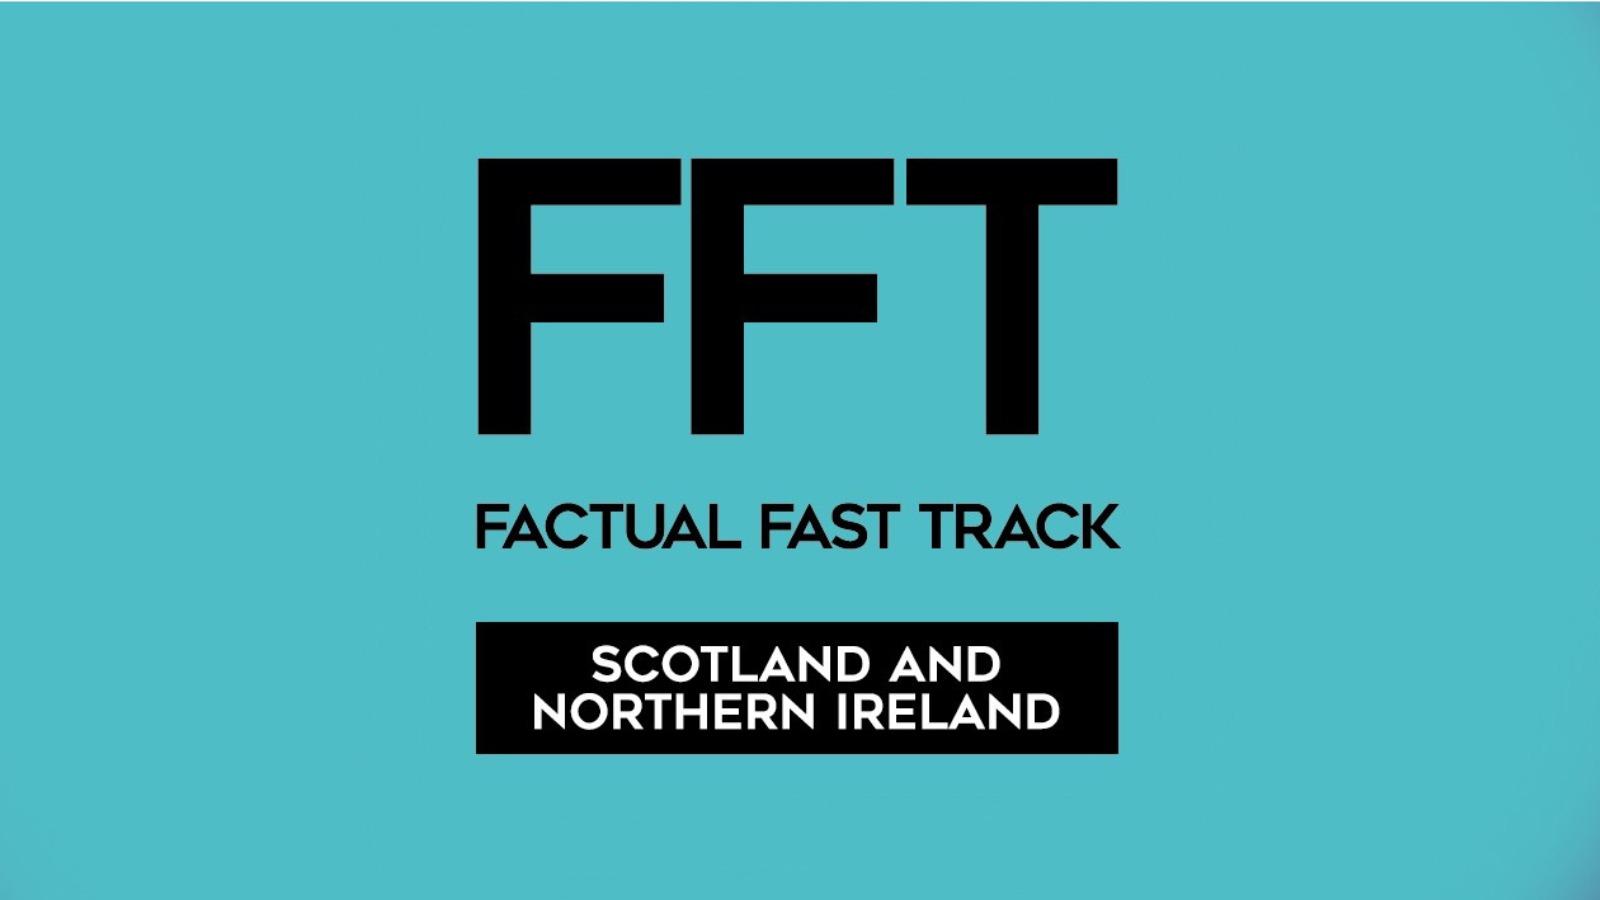 The Factual Fast Track logo on a green background